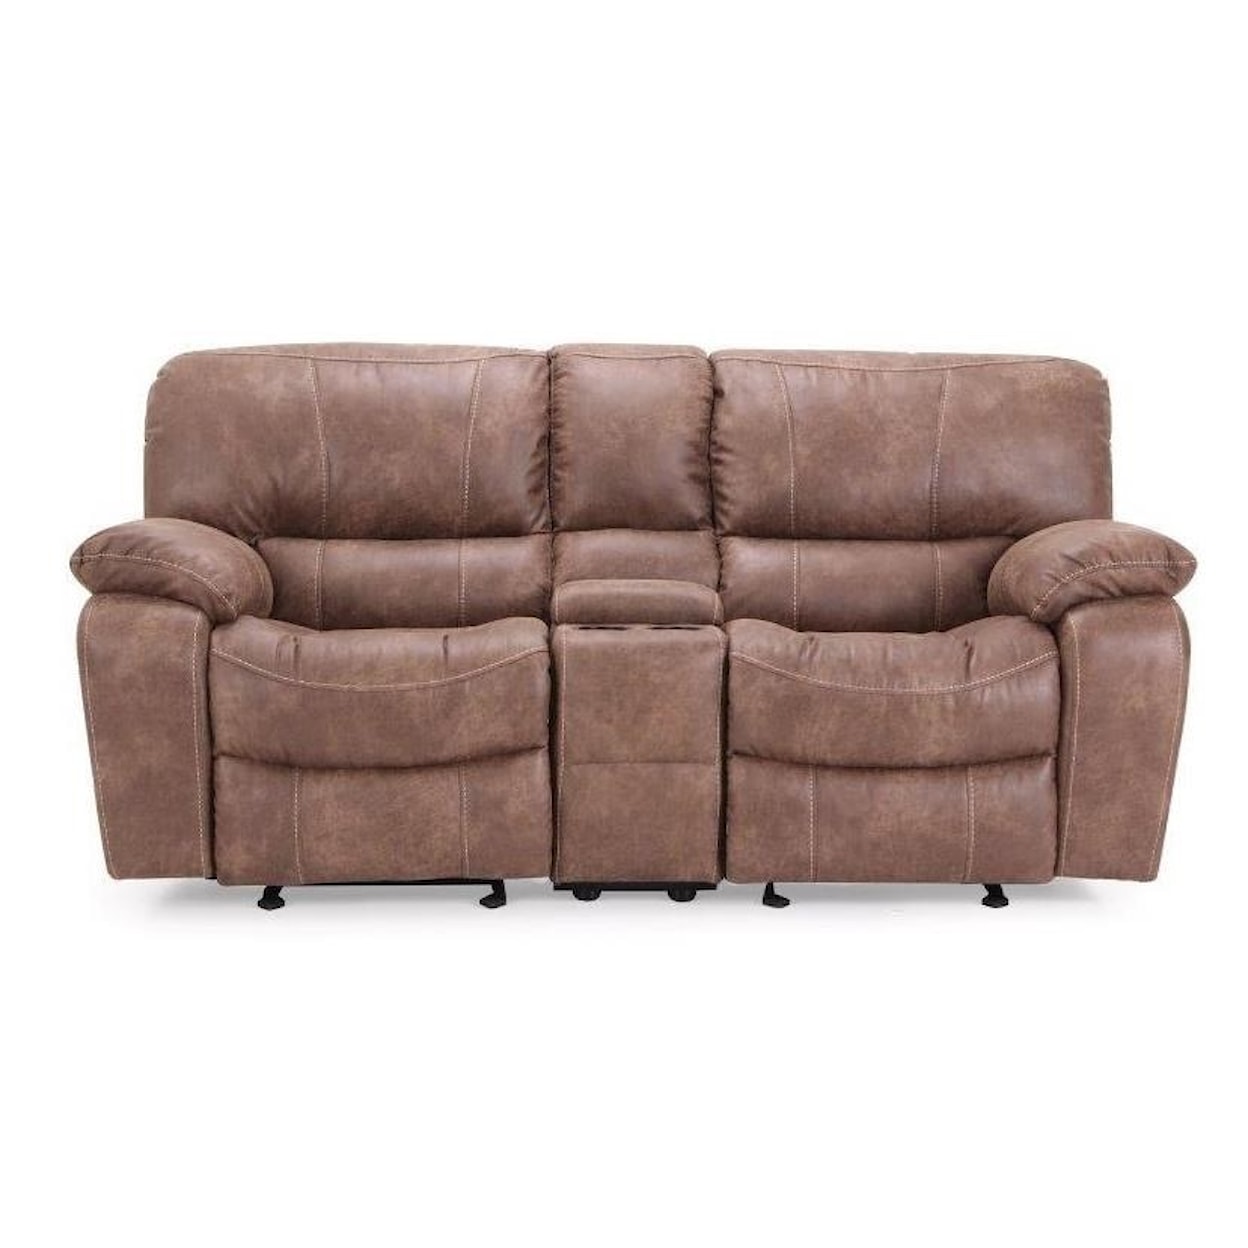 VFM Signature UX8625M Glider Reclining Loveseat with Console